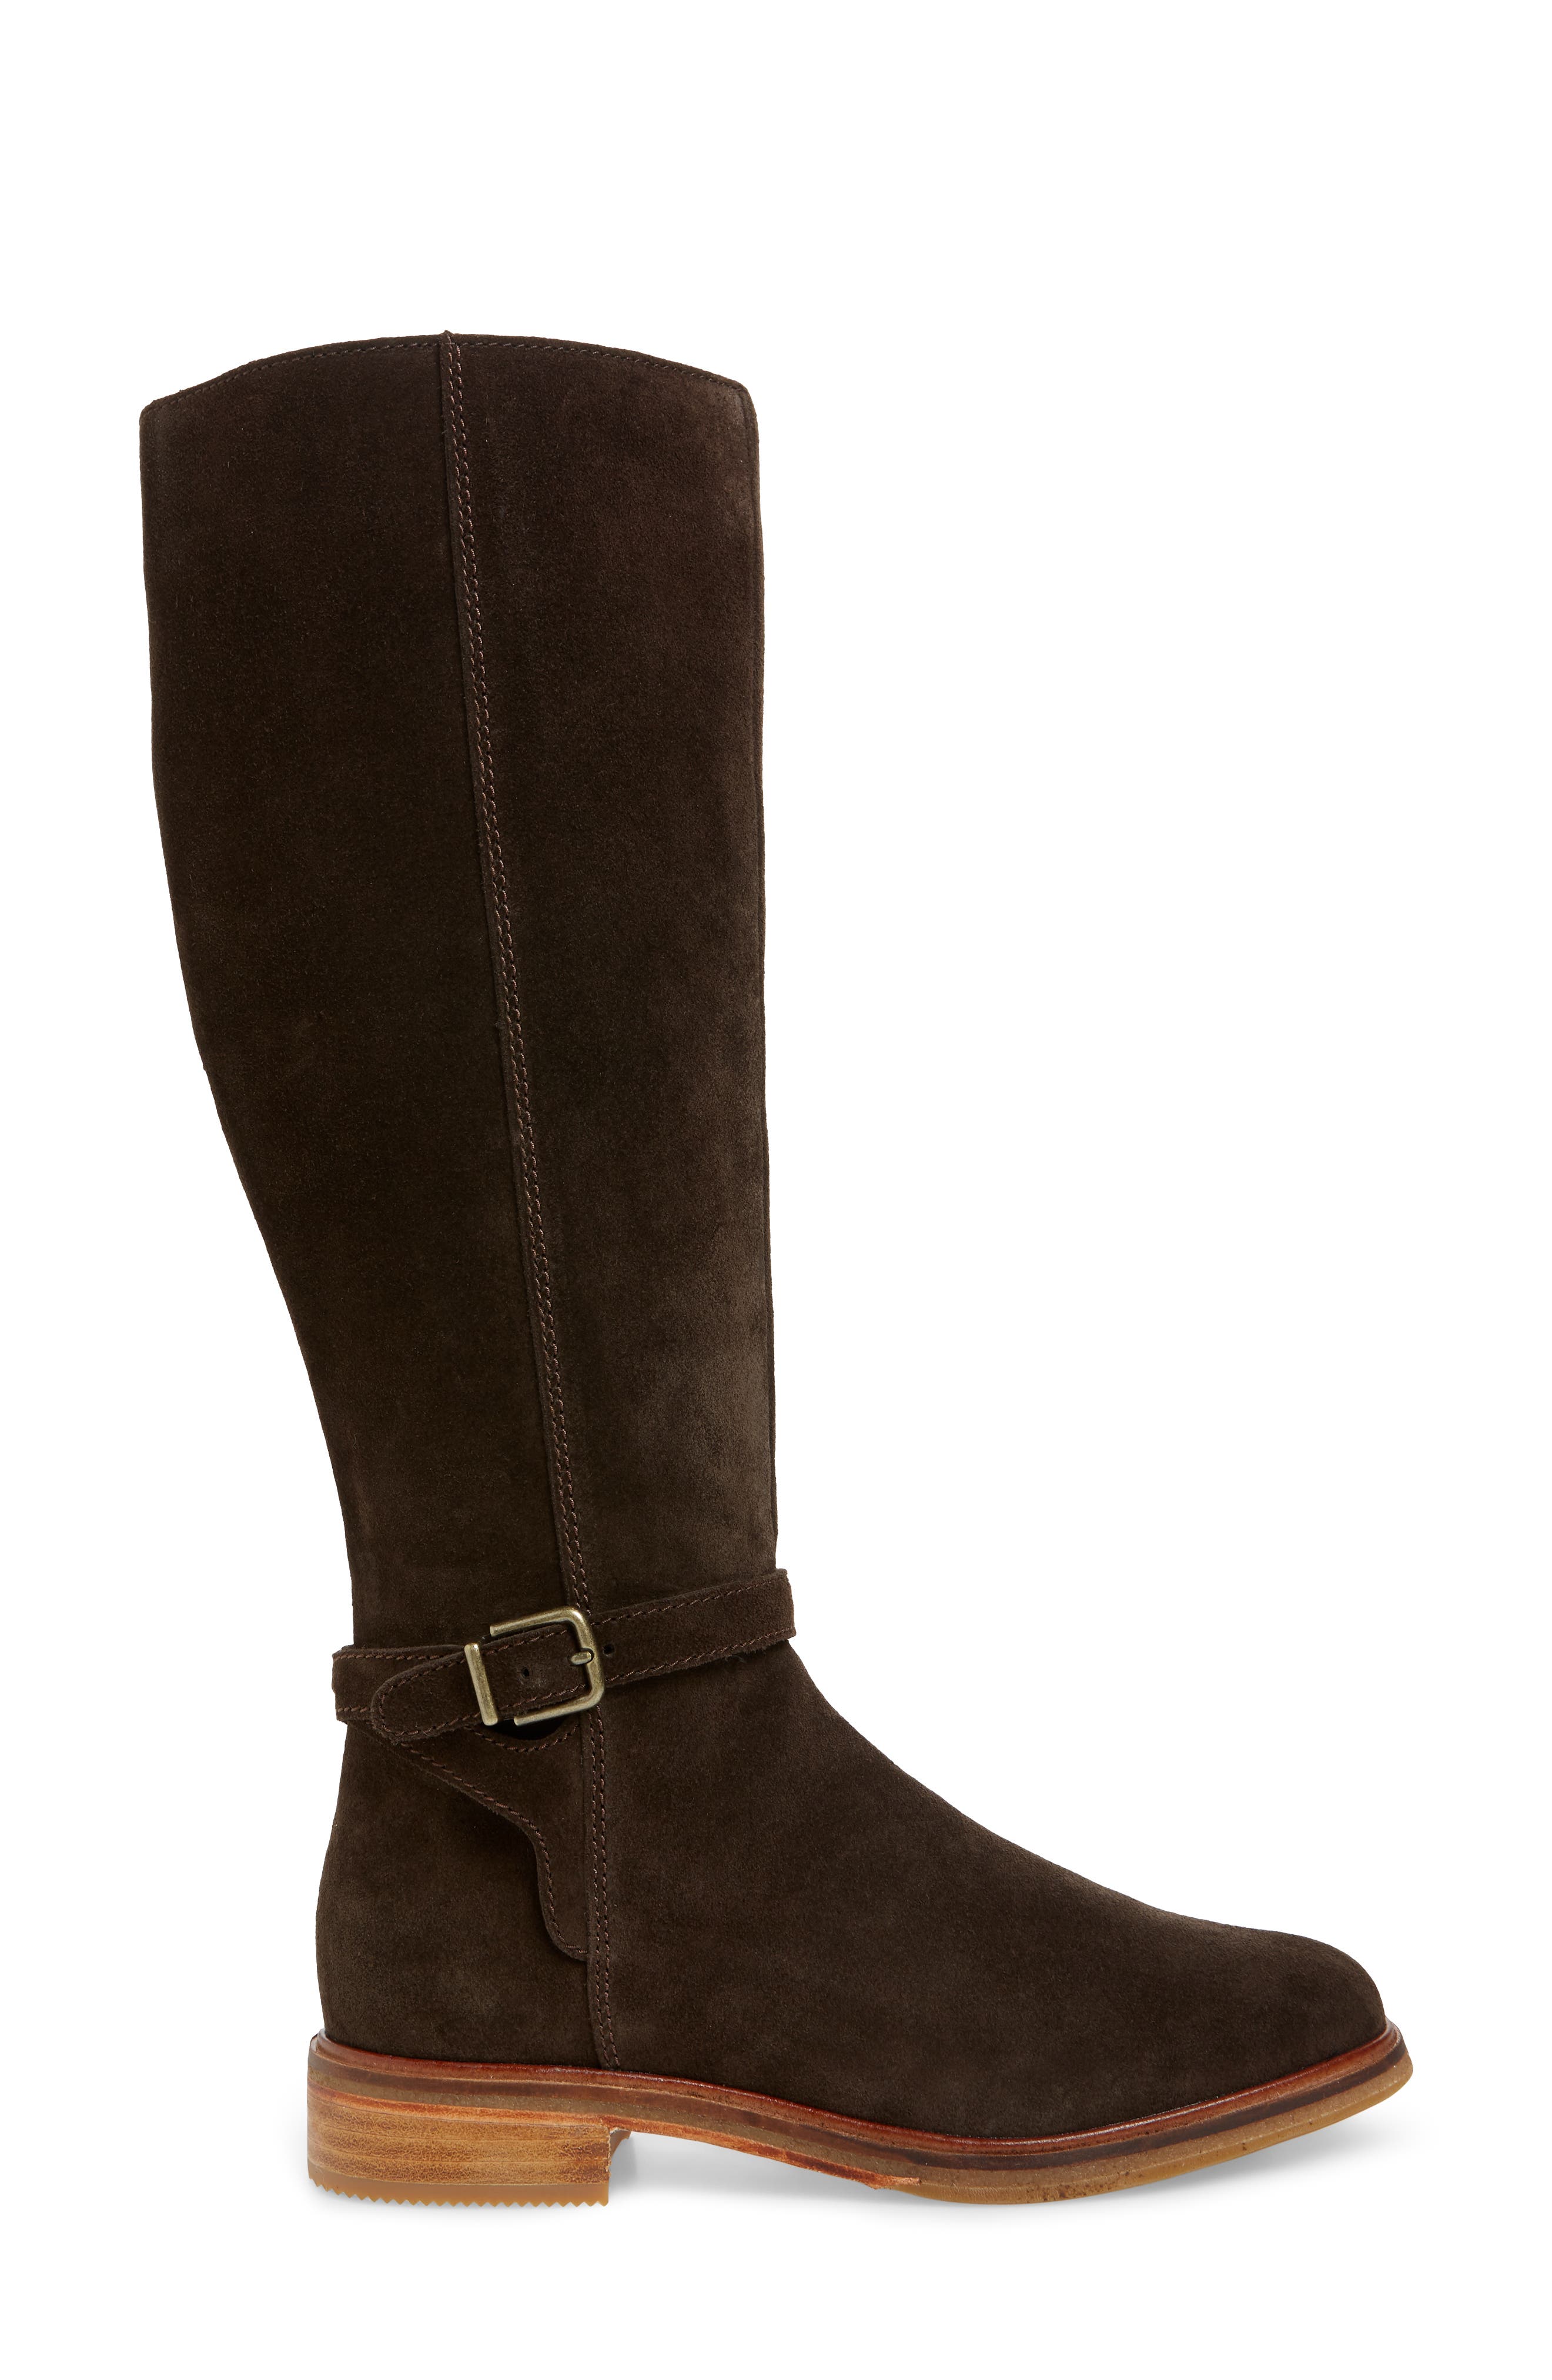 clarkdale clad boot